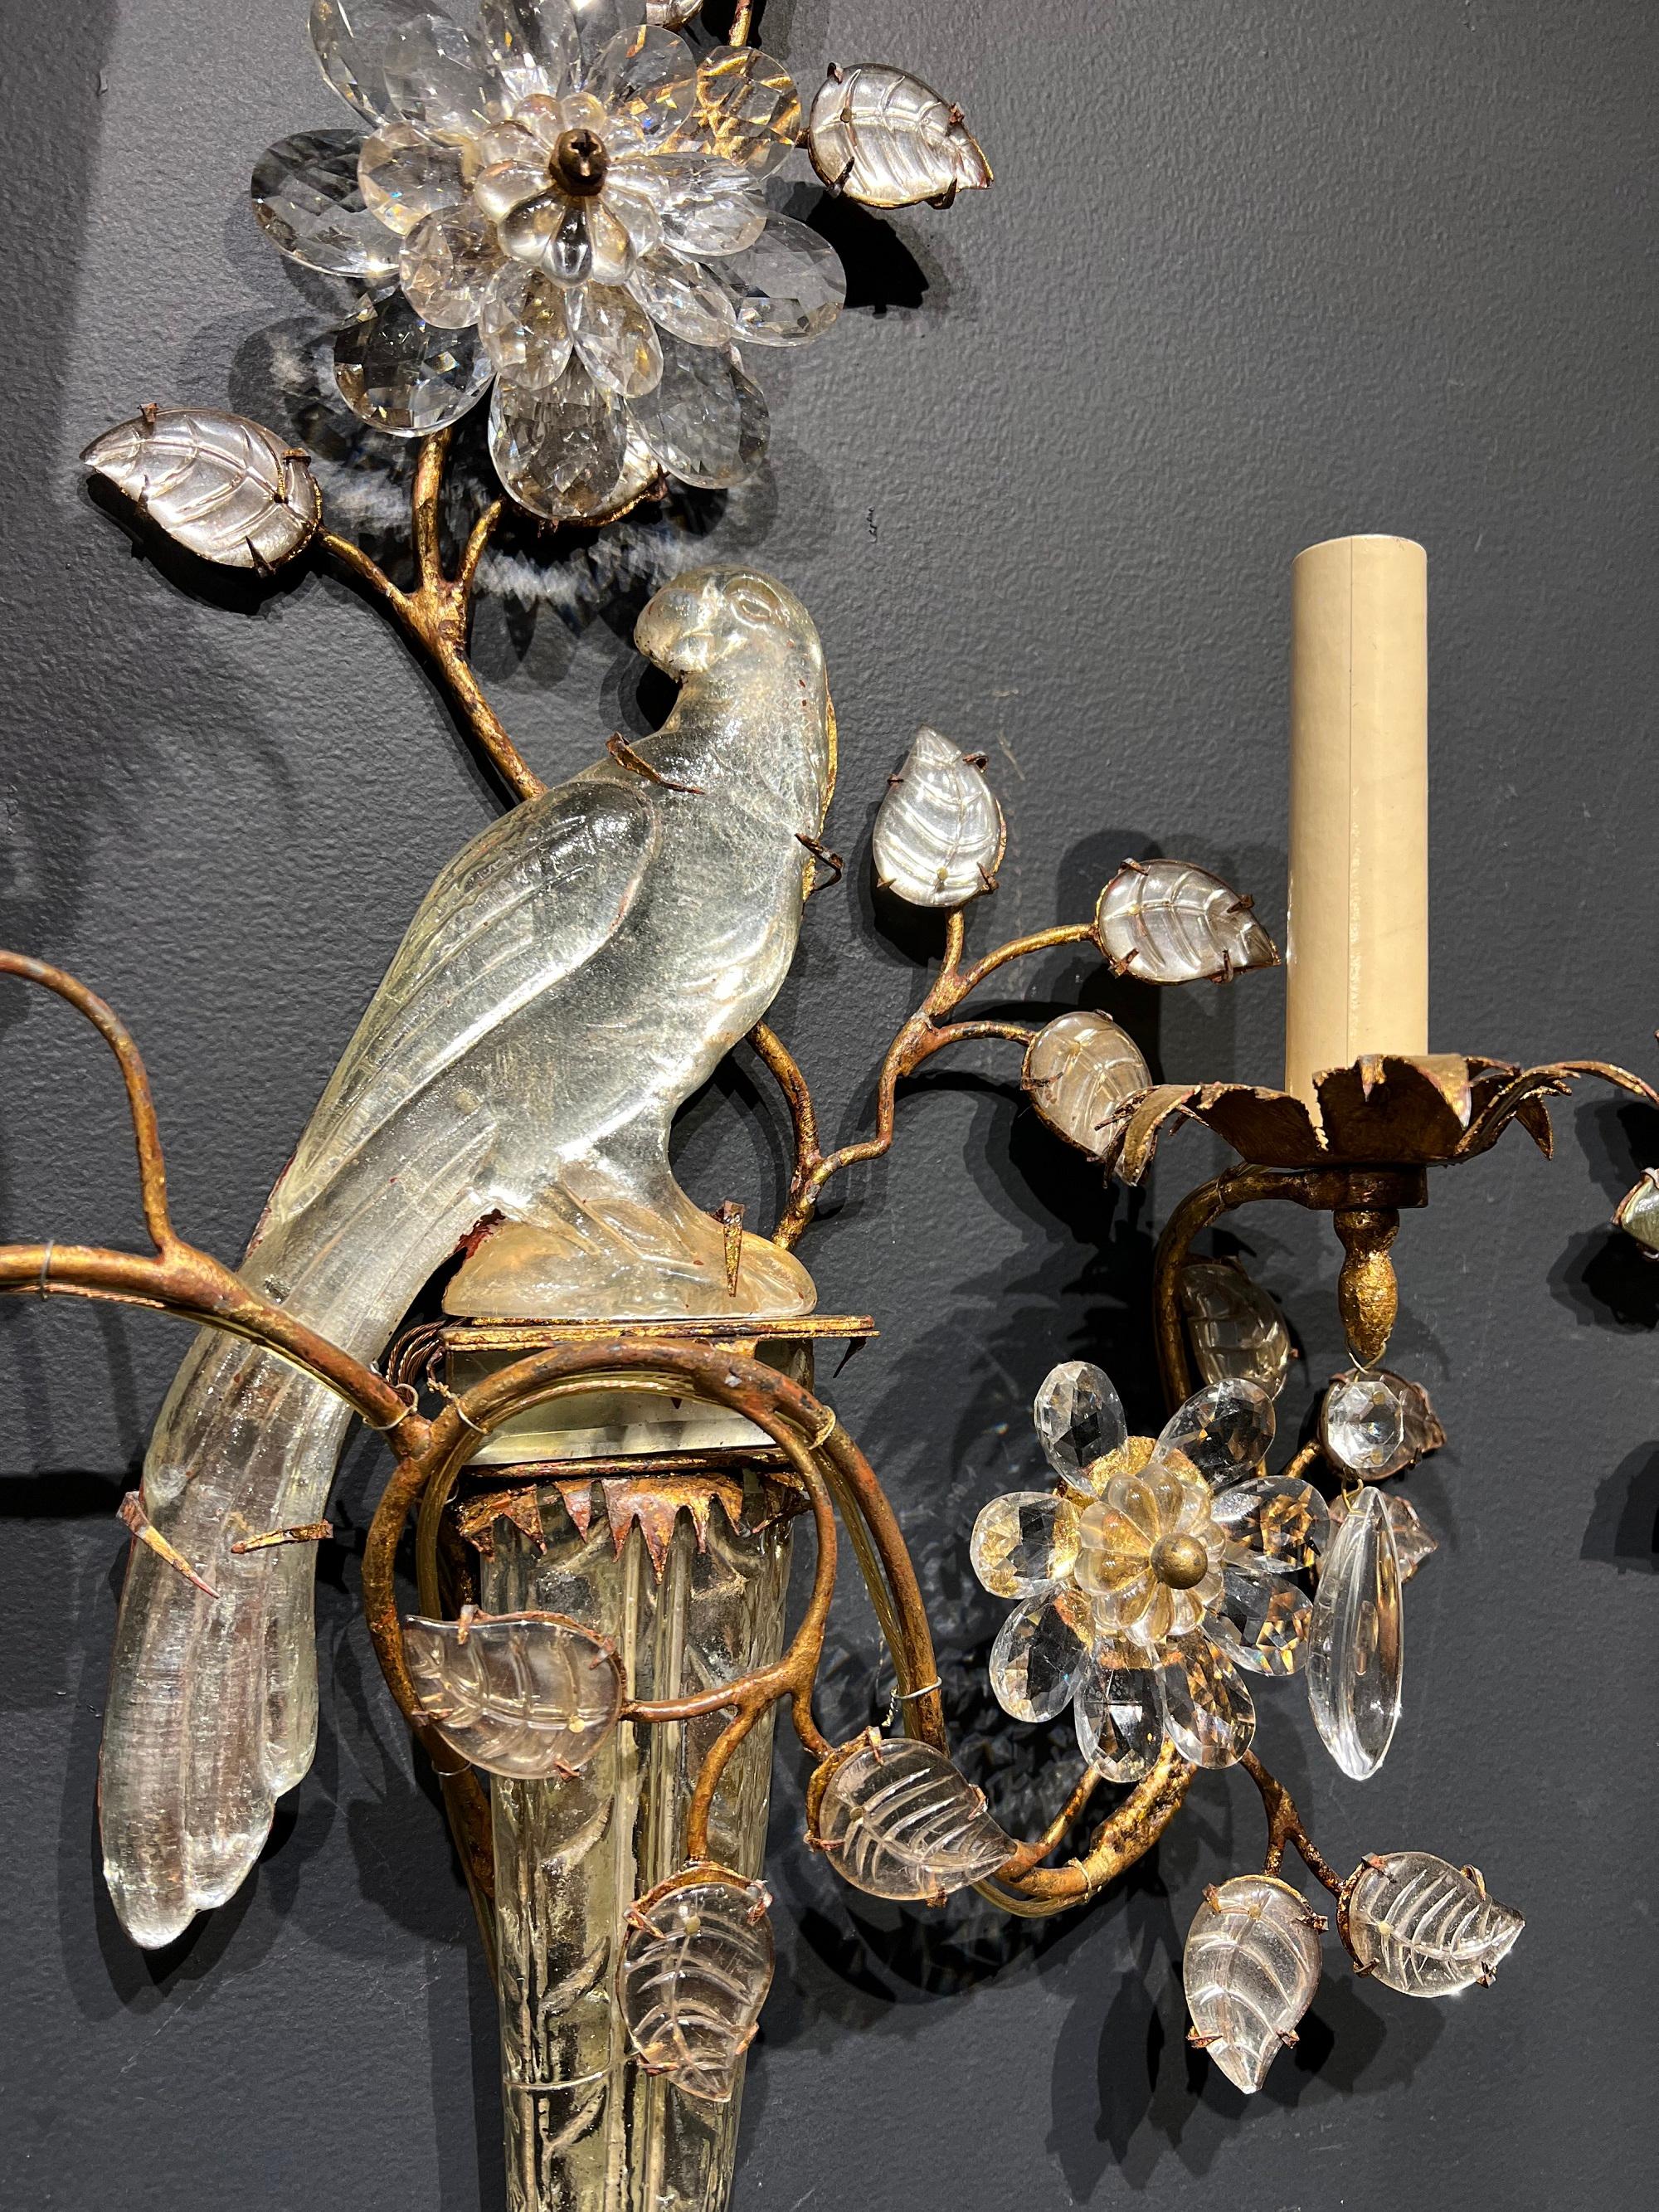 A set of 8 circa 1930 French sconces with mirrored glass birds and leaves. Original gold finish in great condition.
Dimensions
14